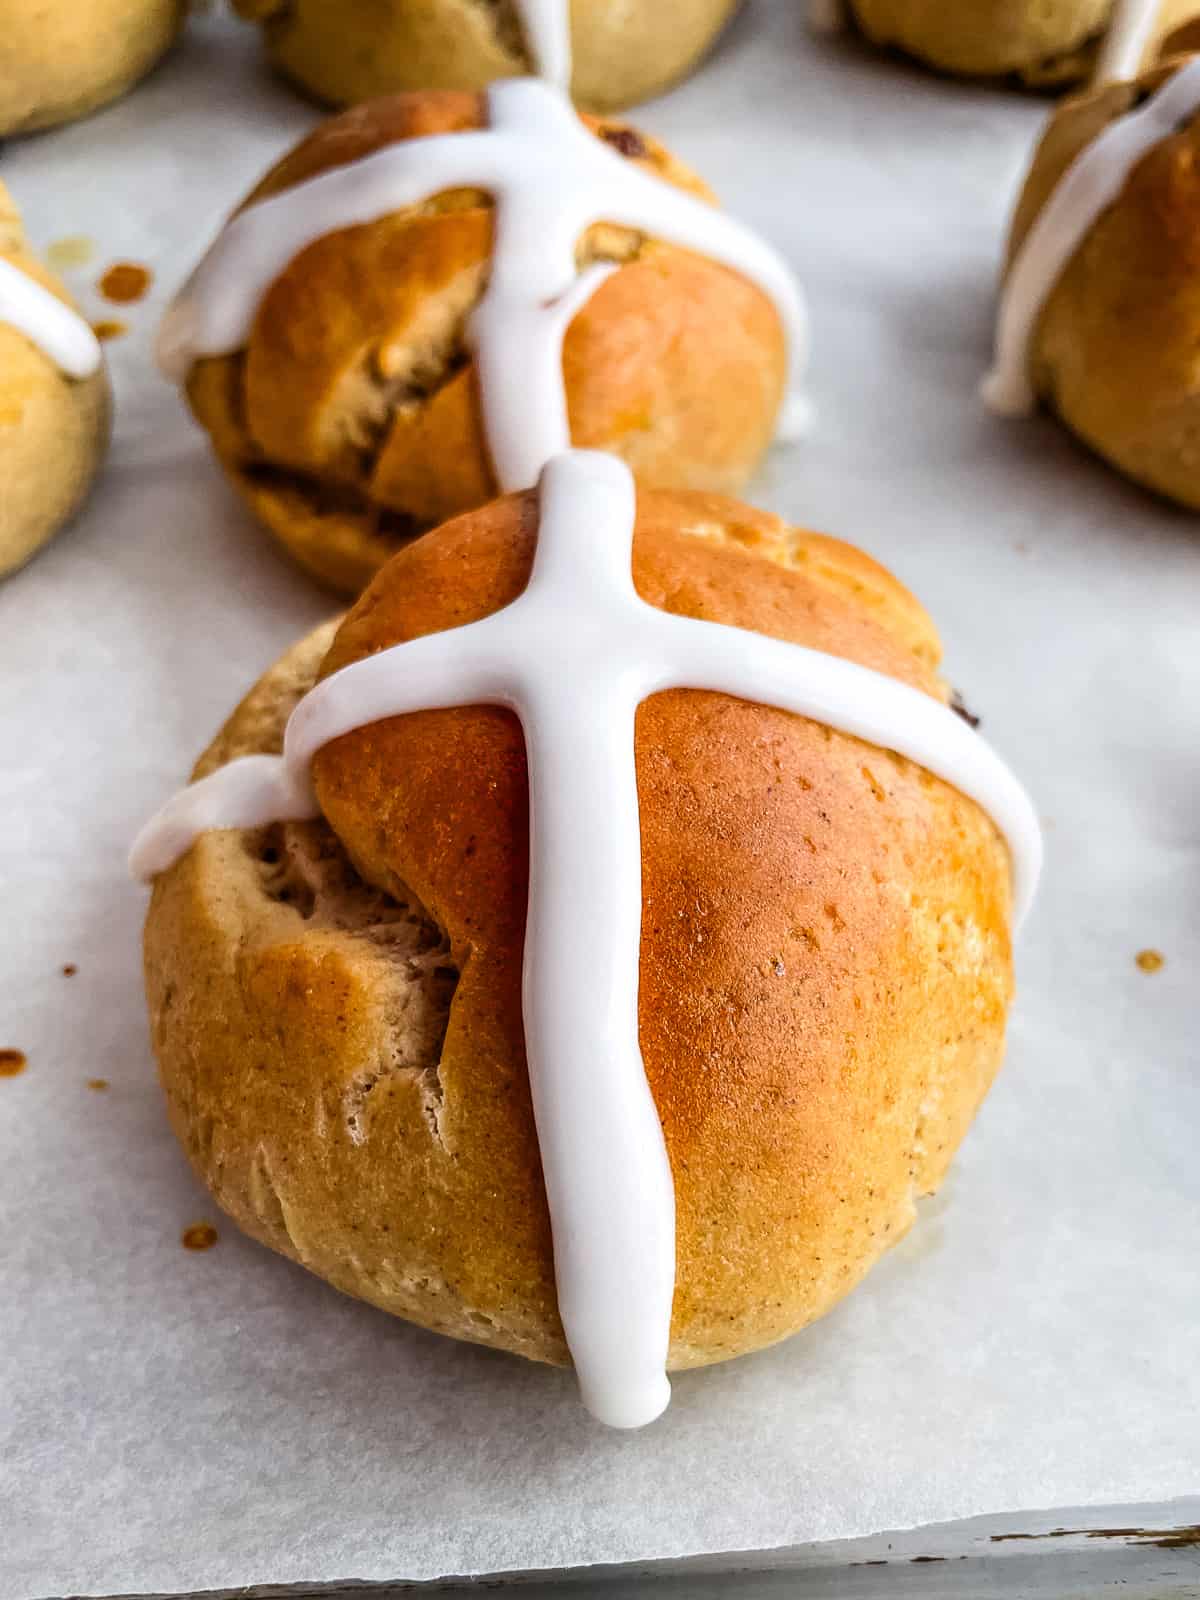 Gluten-free hot cross buns sitting on a baking sheet. The buns are piped with a white icing cross.